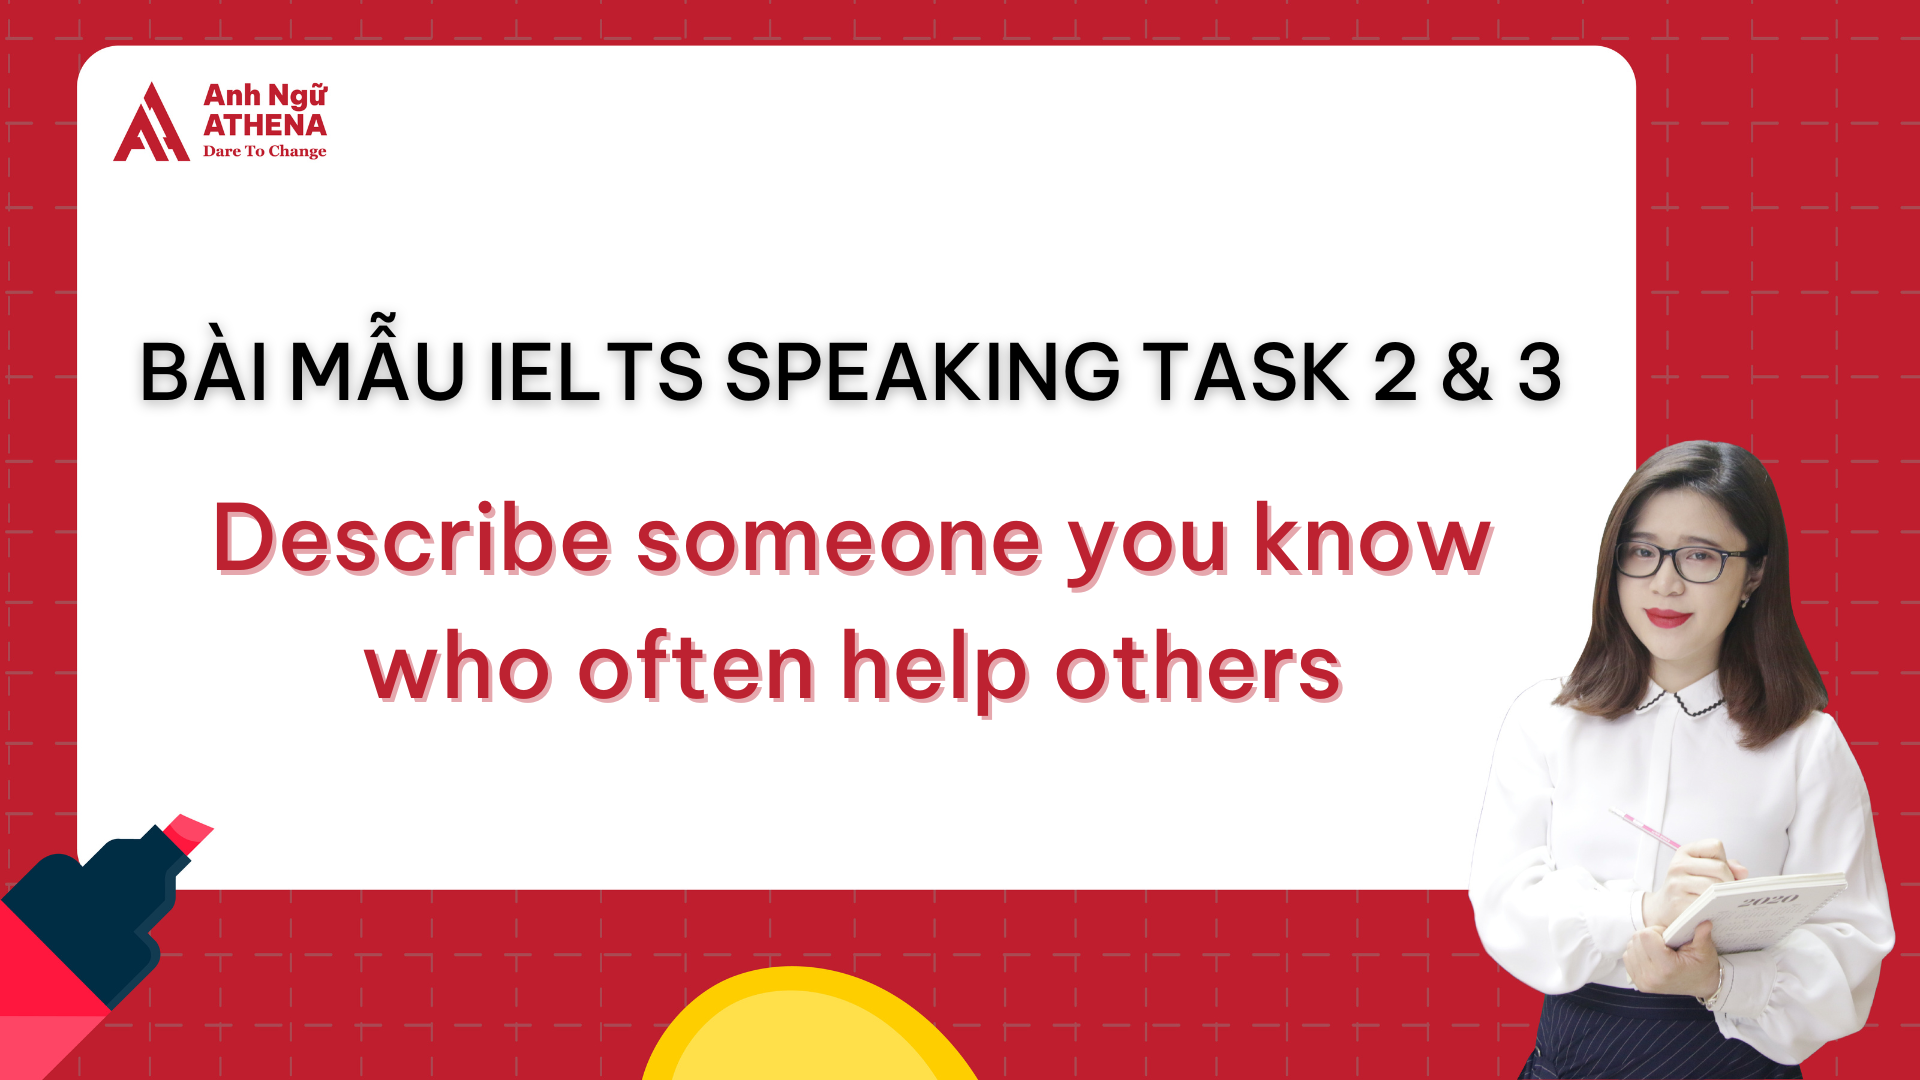 Bài mẫu IELTS Speaking Part 2 & 3 - Topic: Describe someone you know who often help others